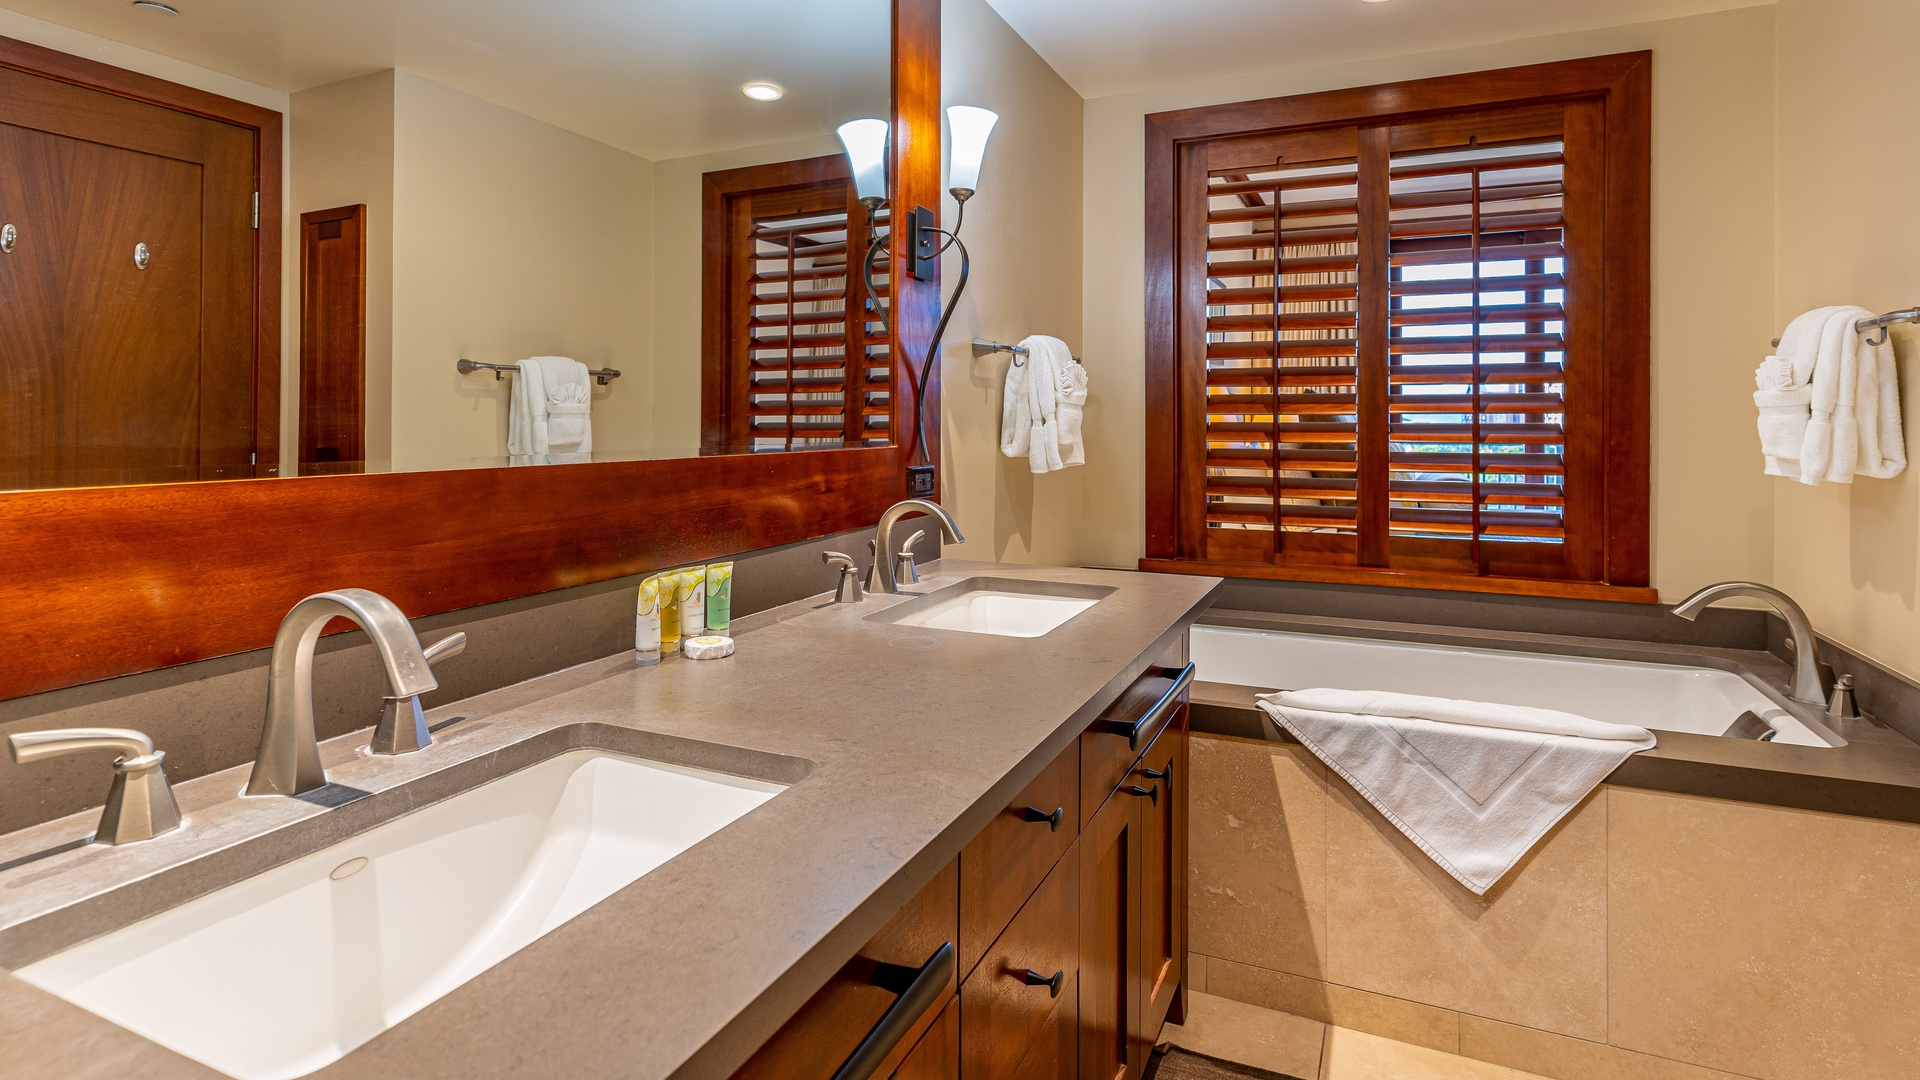 Kapolei Vacation Rentals, Ko Olina Beach Villas B706 - The primary guest bathroom with a double vanity and a large soaking tub where you can relax your cares away.